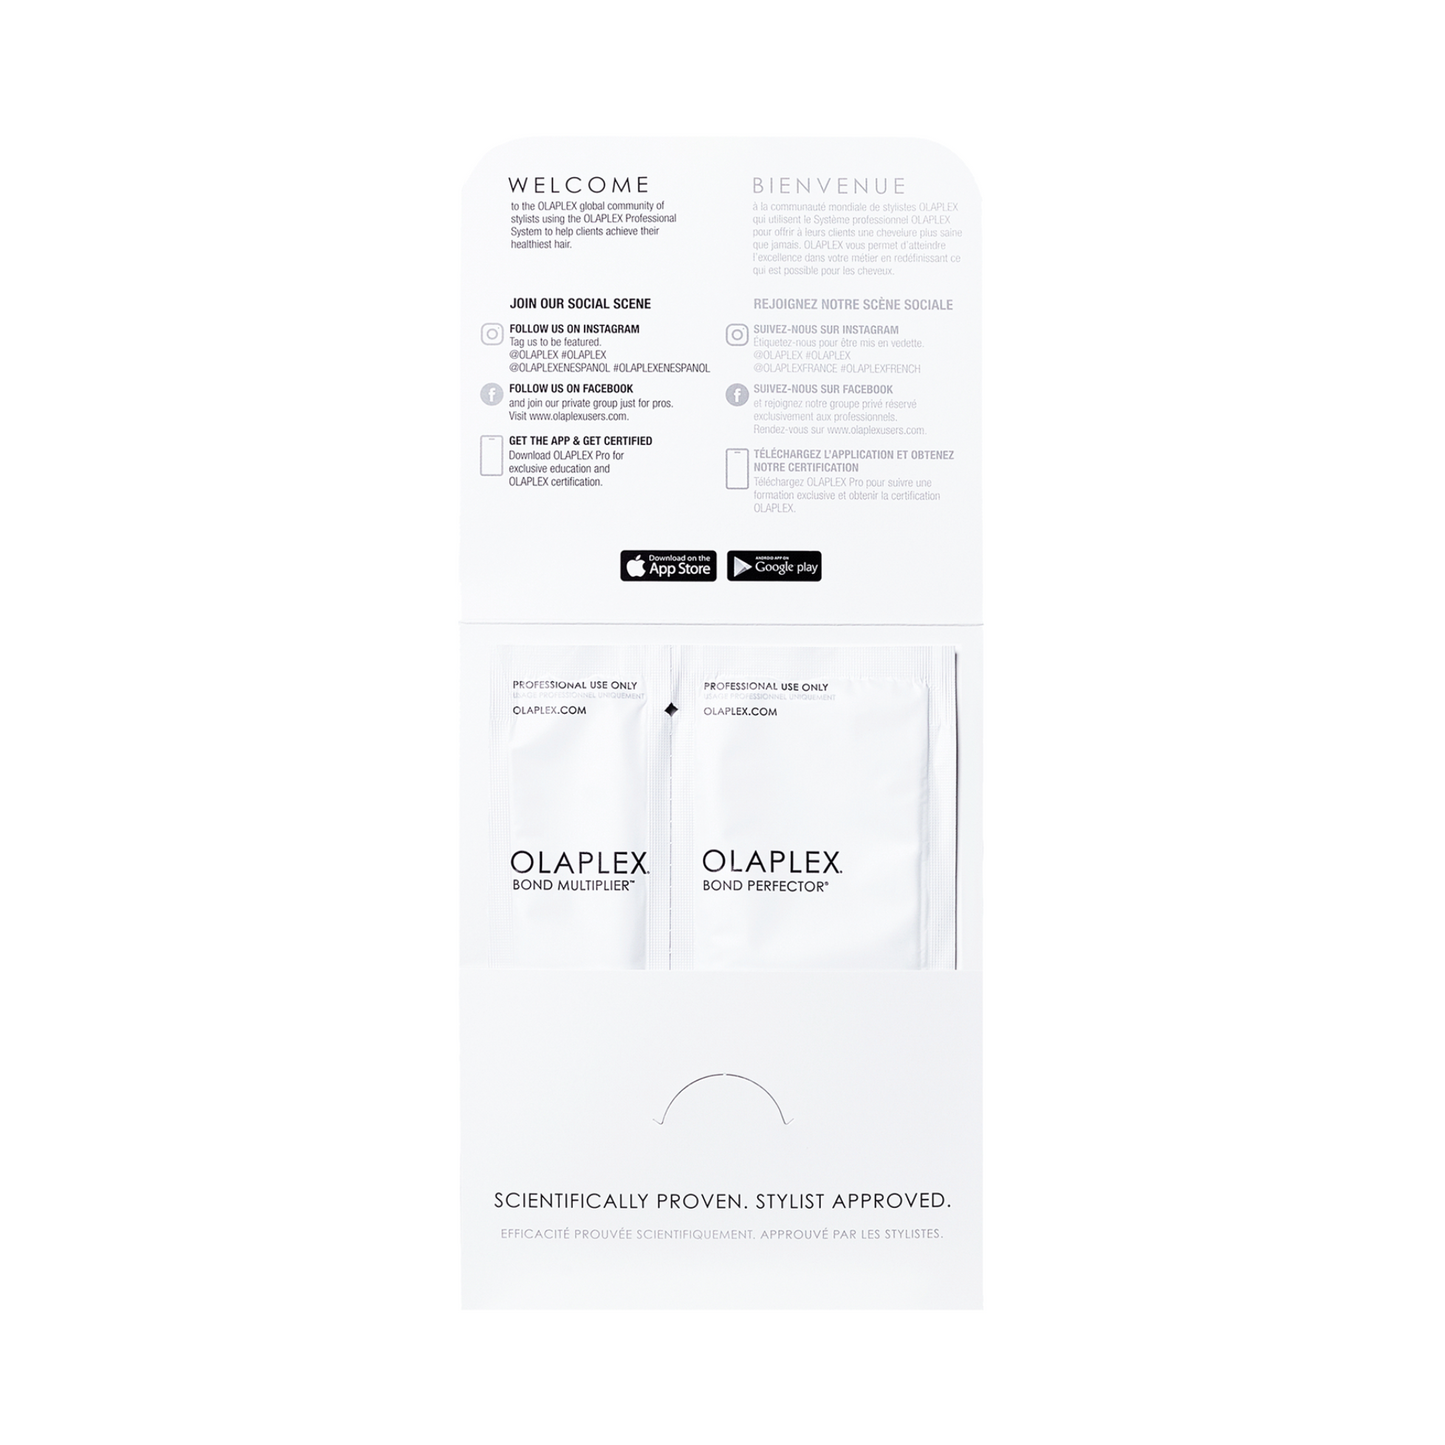  The groundbreaking two-part OLAPLEX Professional System, No.1 Bond Multiplier and No.2 Bond Perfector, has the highest concentration of patented OLAPLEX Bond Building Technology. This proven, professional hair repair system trusted by stylists worldwide is now available to stylists in single-use dual packets.